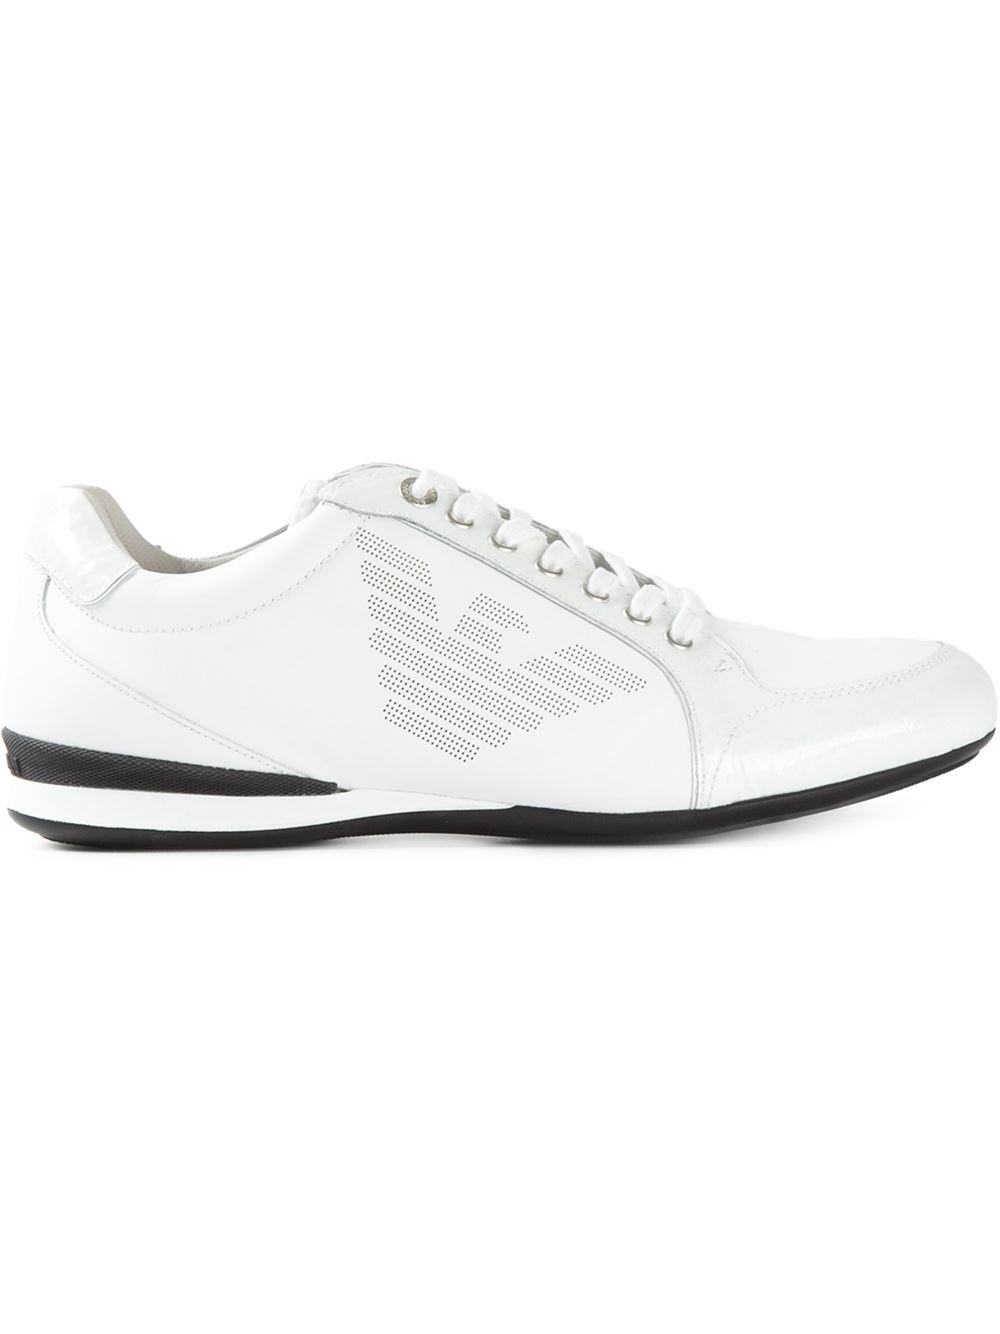 Emporio Armani Paneled Sneakers in White for Men | Lyst